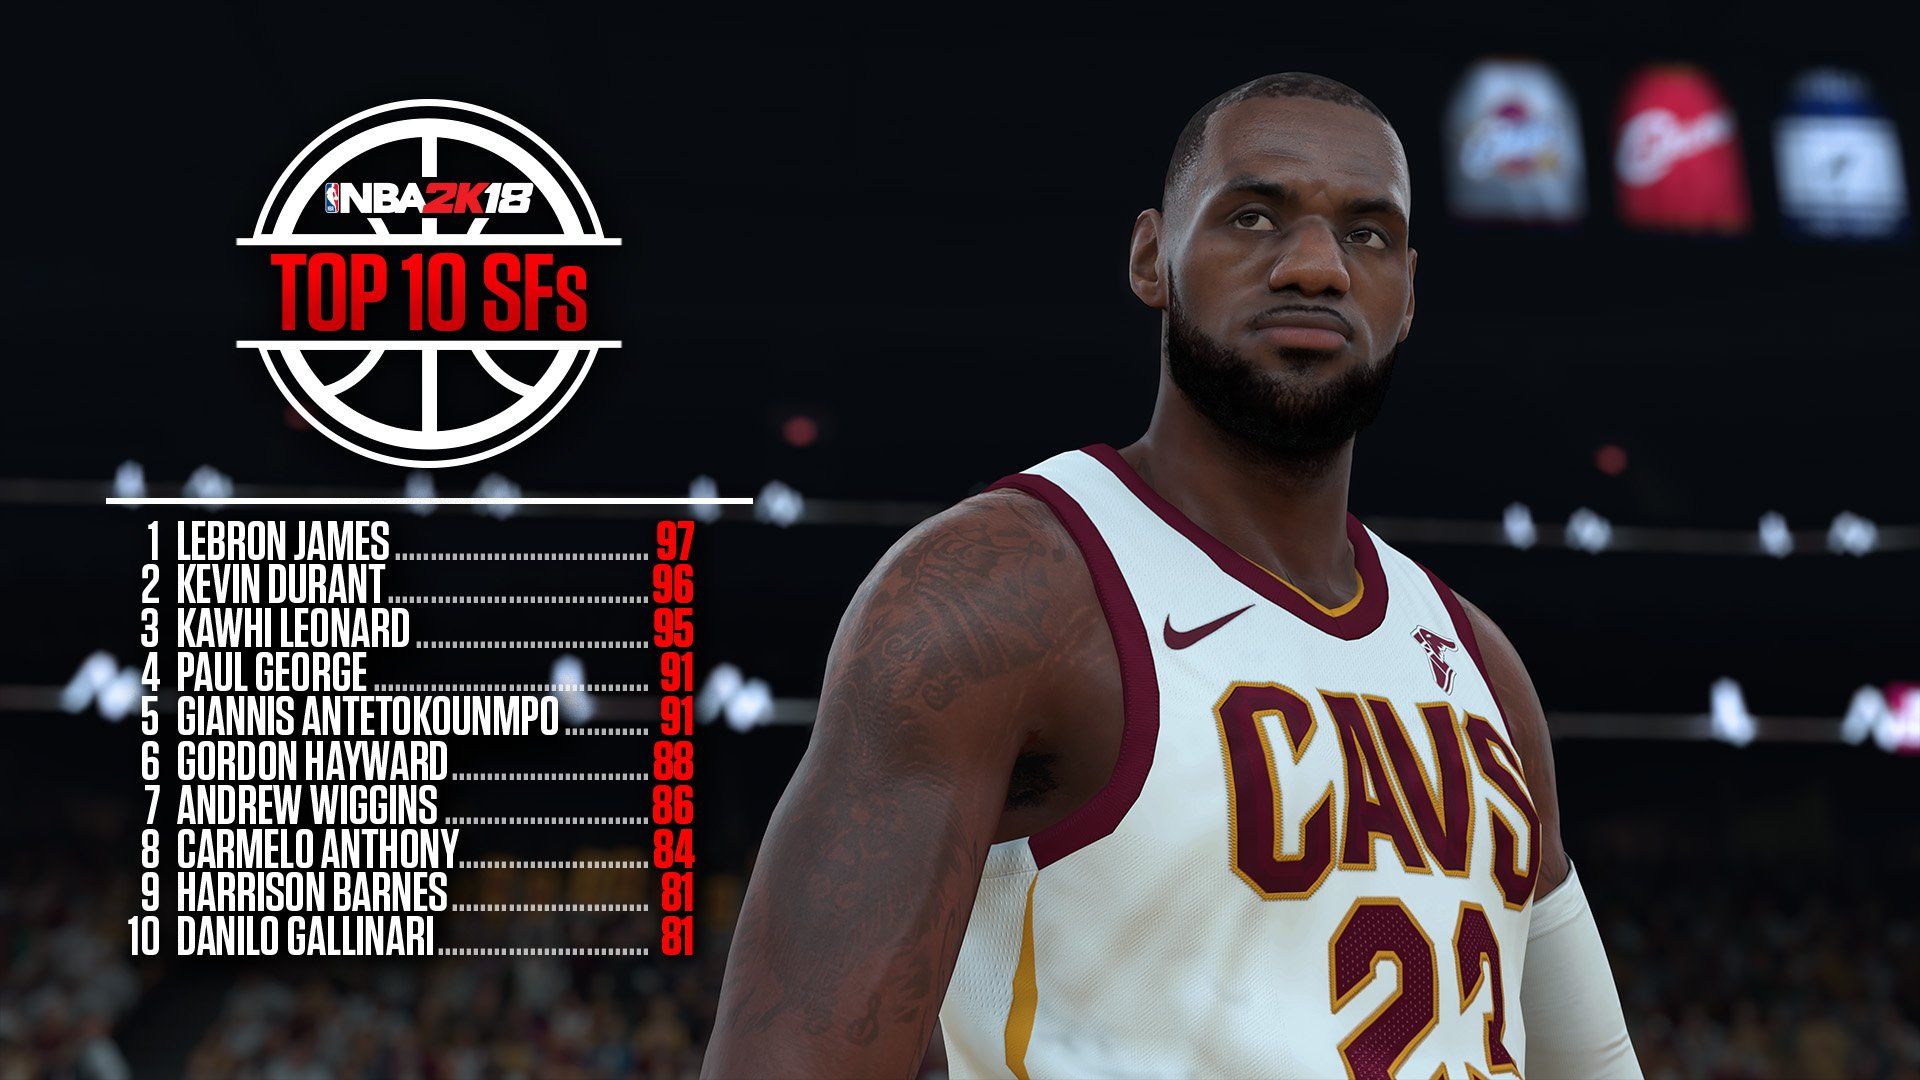 NBA 2K18 Player Ratings: LeBron James, Kyrie Irving, Kevin Durant